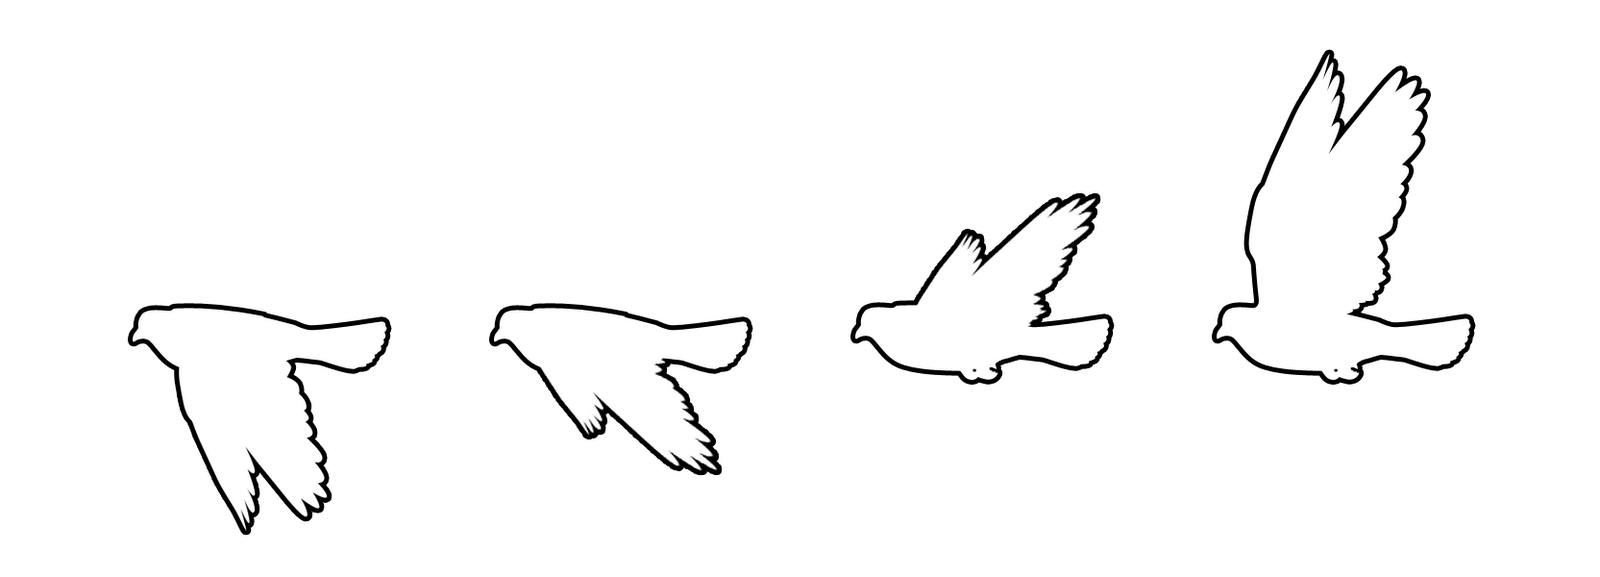 Dove Sequence   Free Images At Clker Com   Vector Clip Art Online